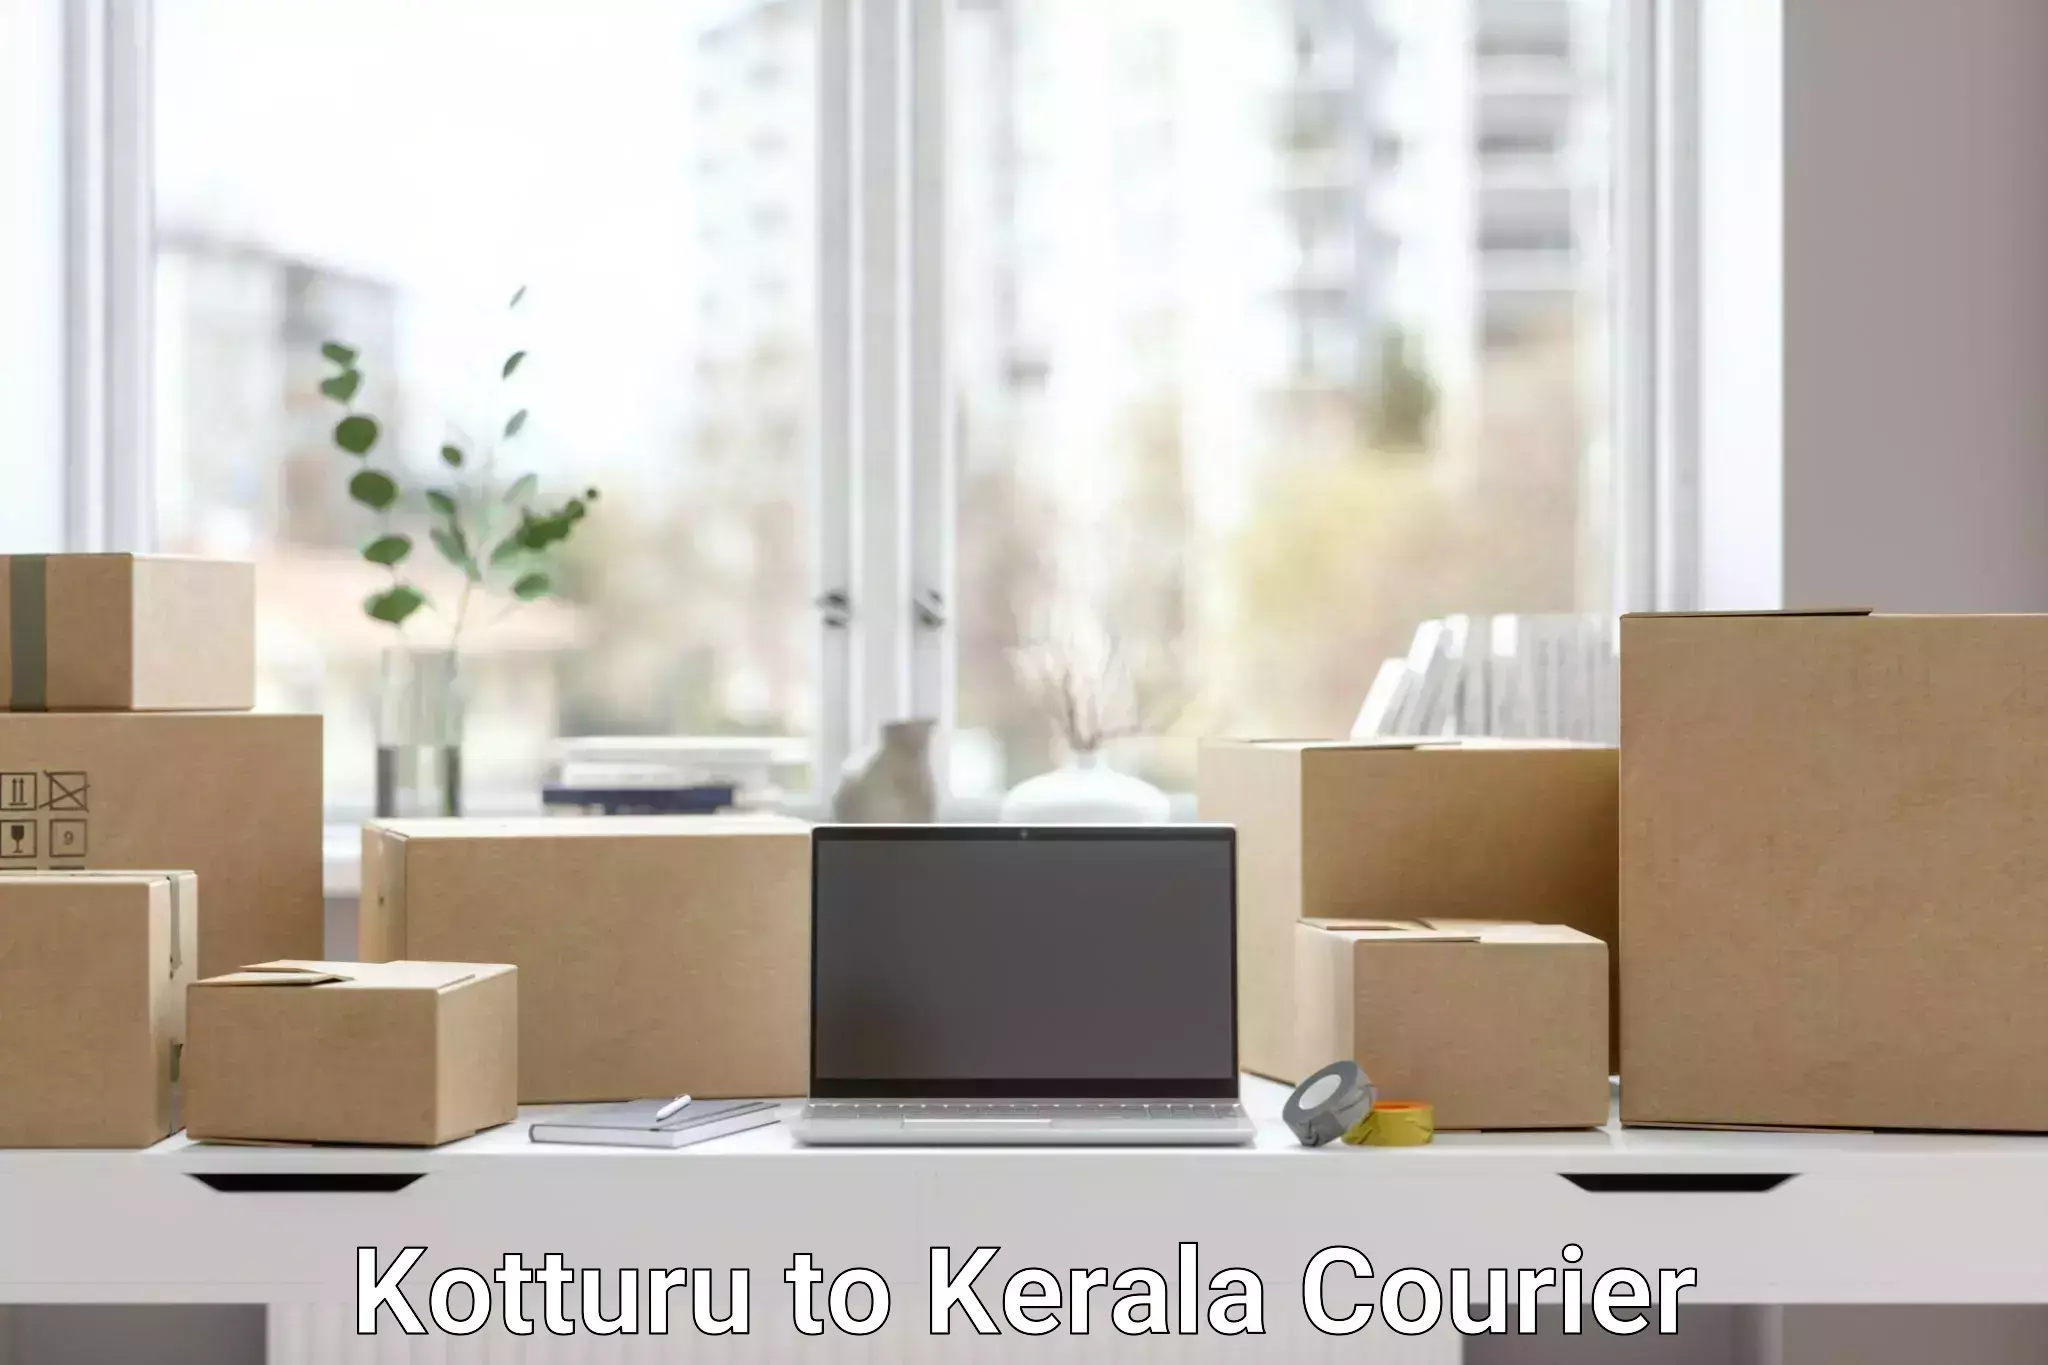 Same-day delivery solutions in Kotturu to Kerala